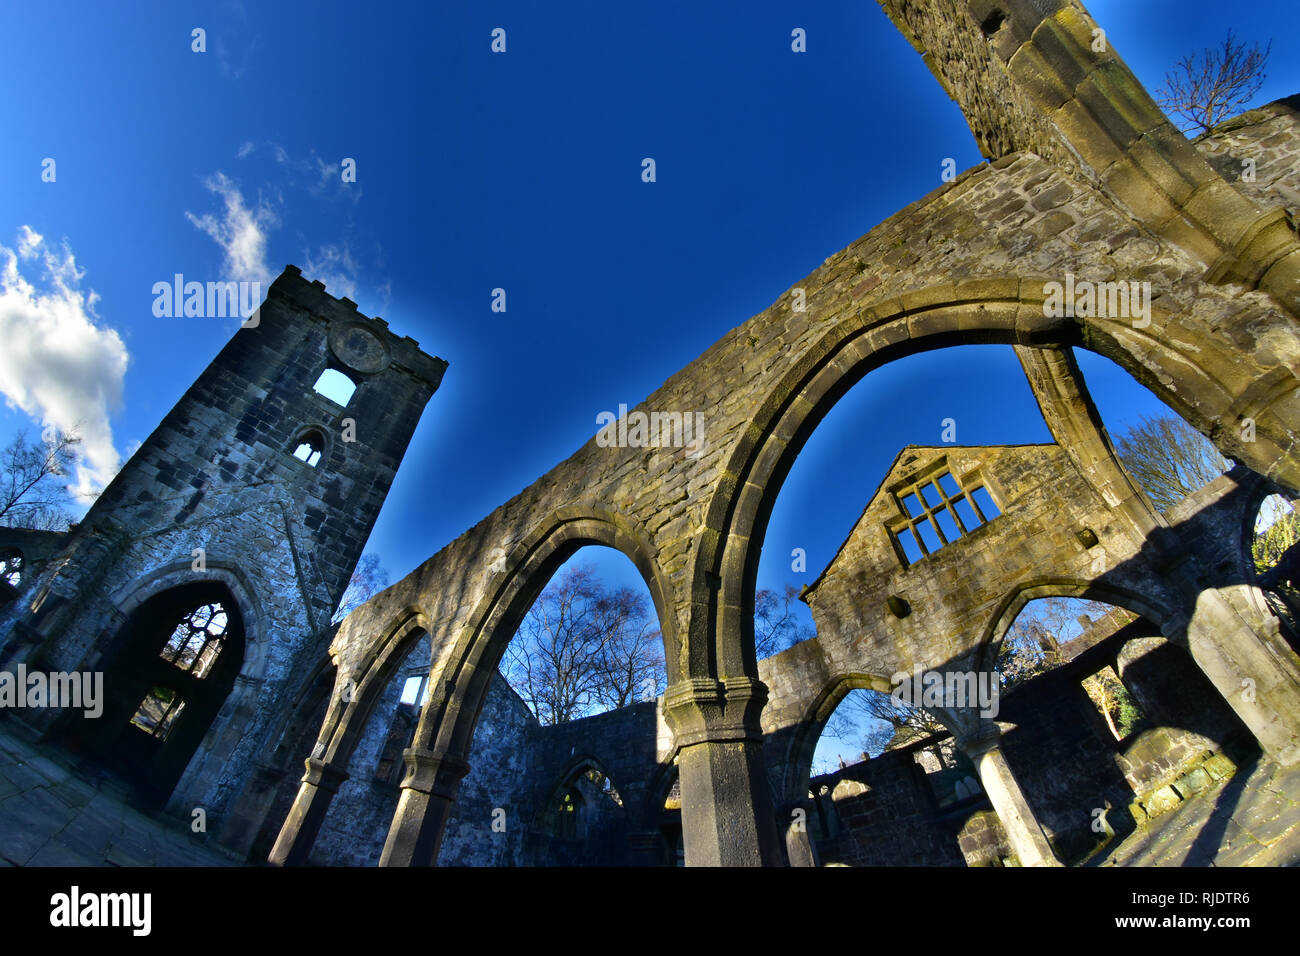 Heptonstall Churches, St Thomas, Calderdale, West Yorkshire Stock Photo